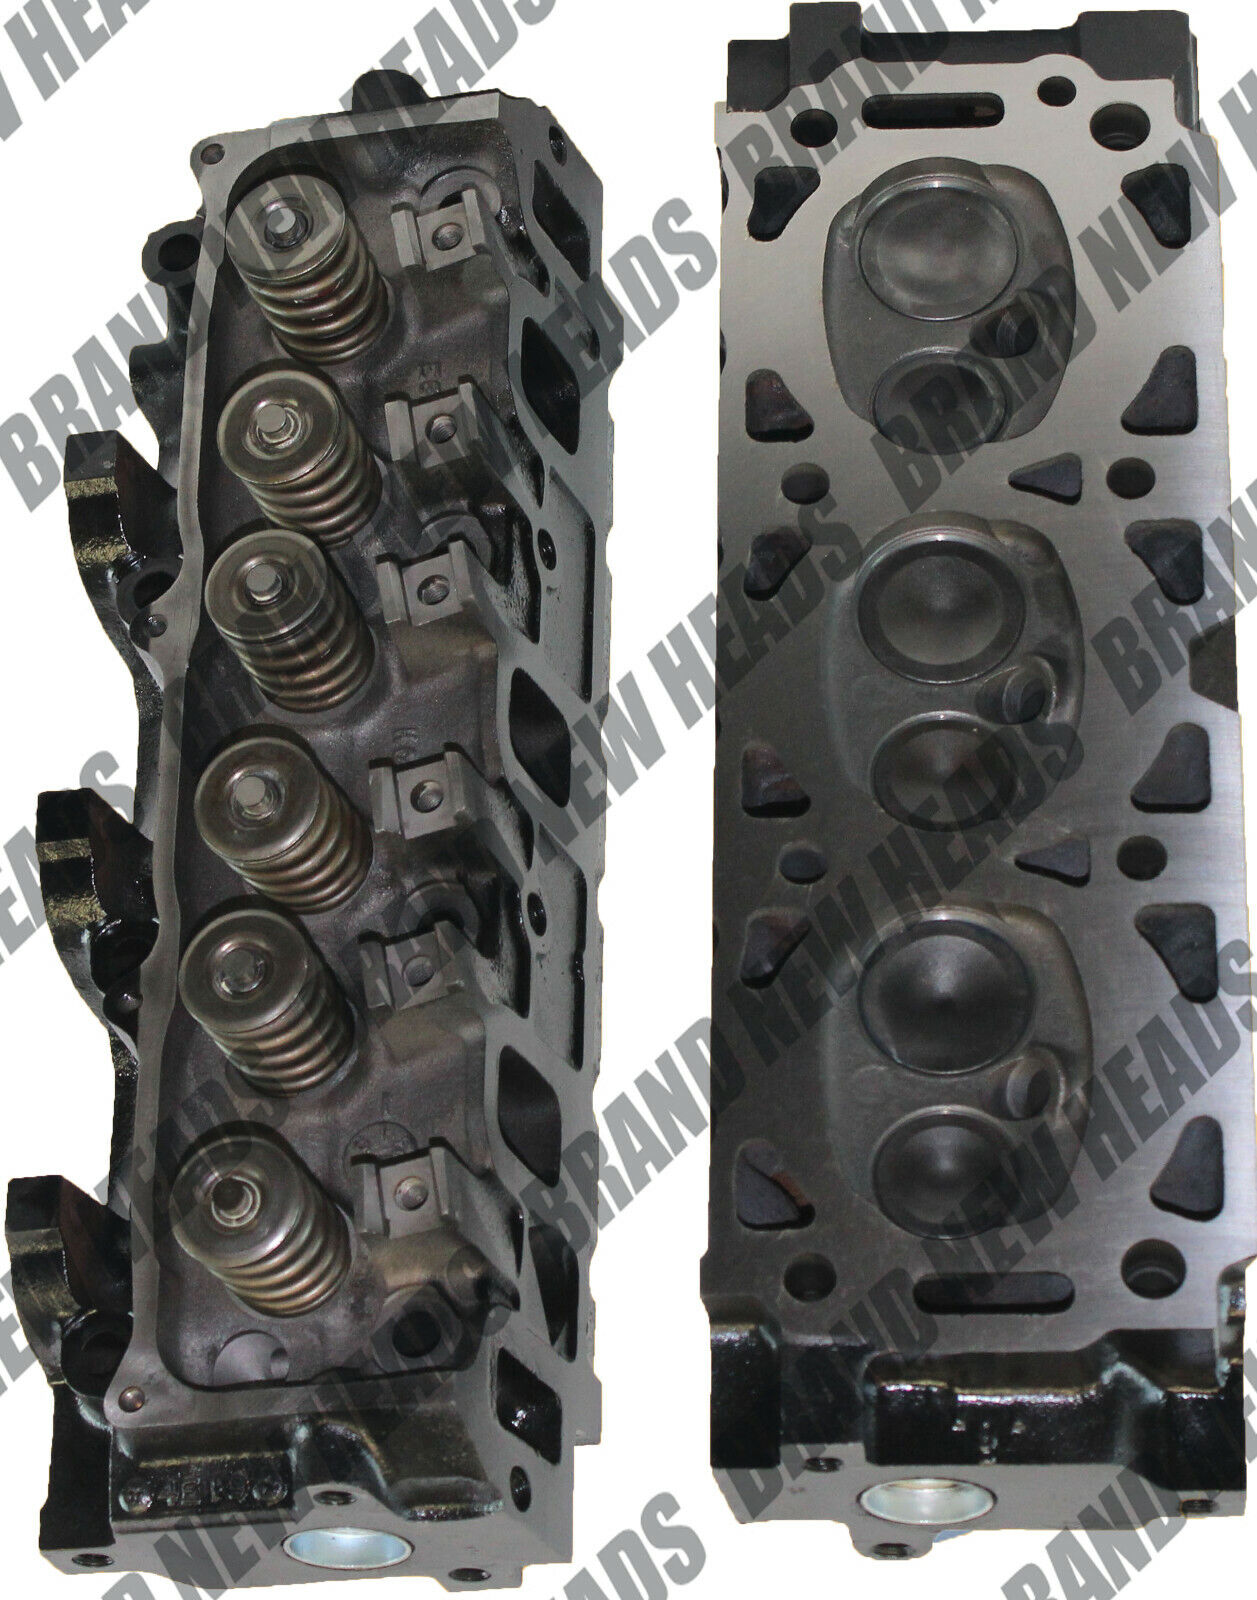 BRAND NEW Ford Taurus Ranger Sable 3.0 OHV Cylinder Heads PAIR 8MM 1986-1999